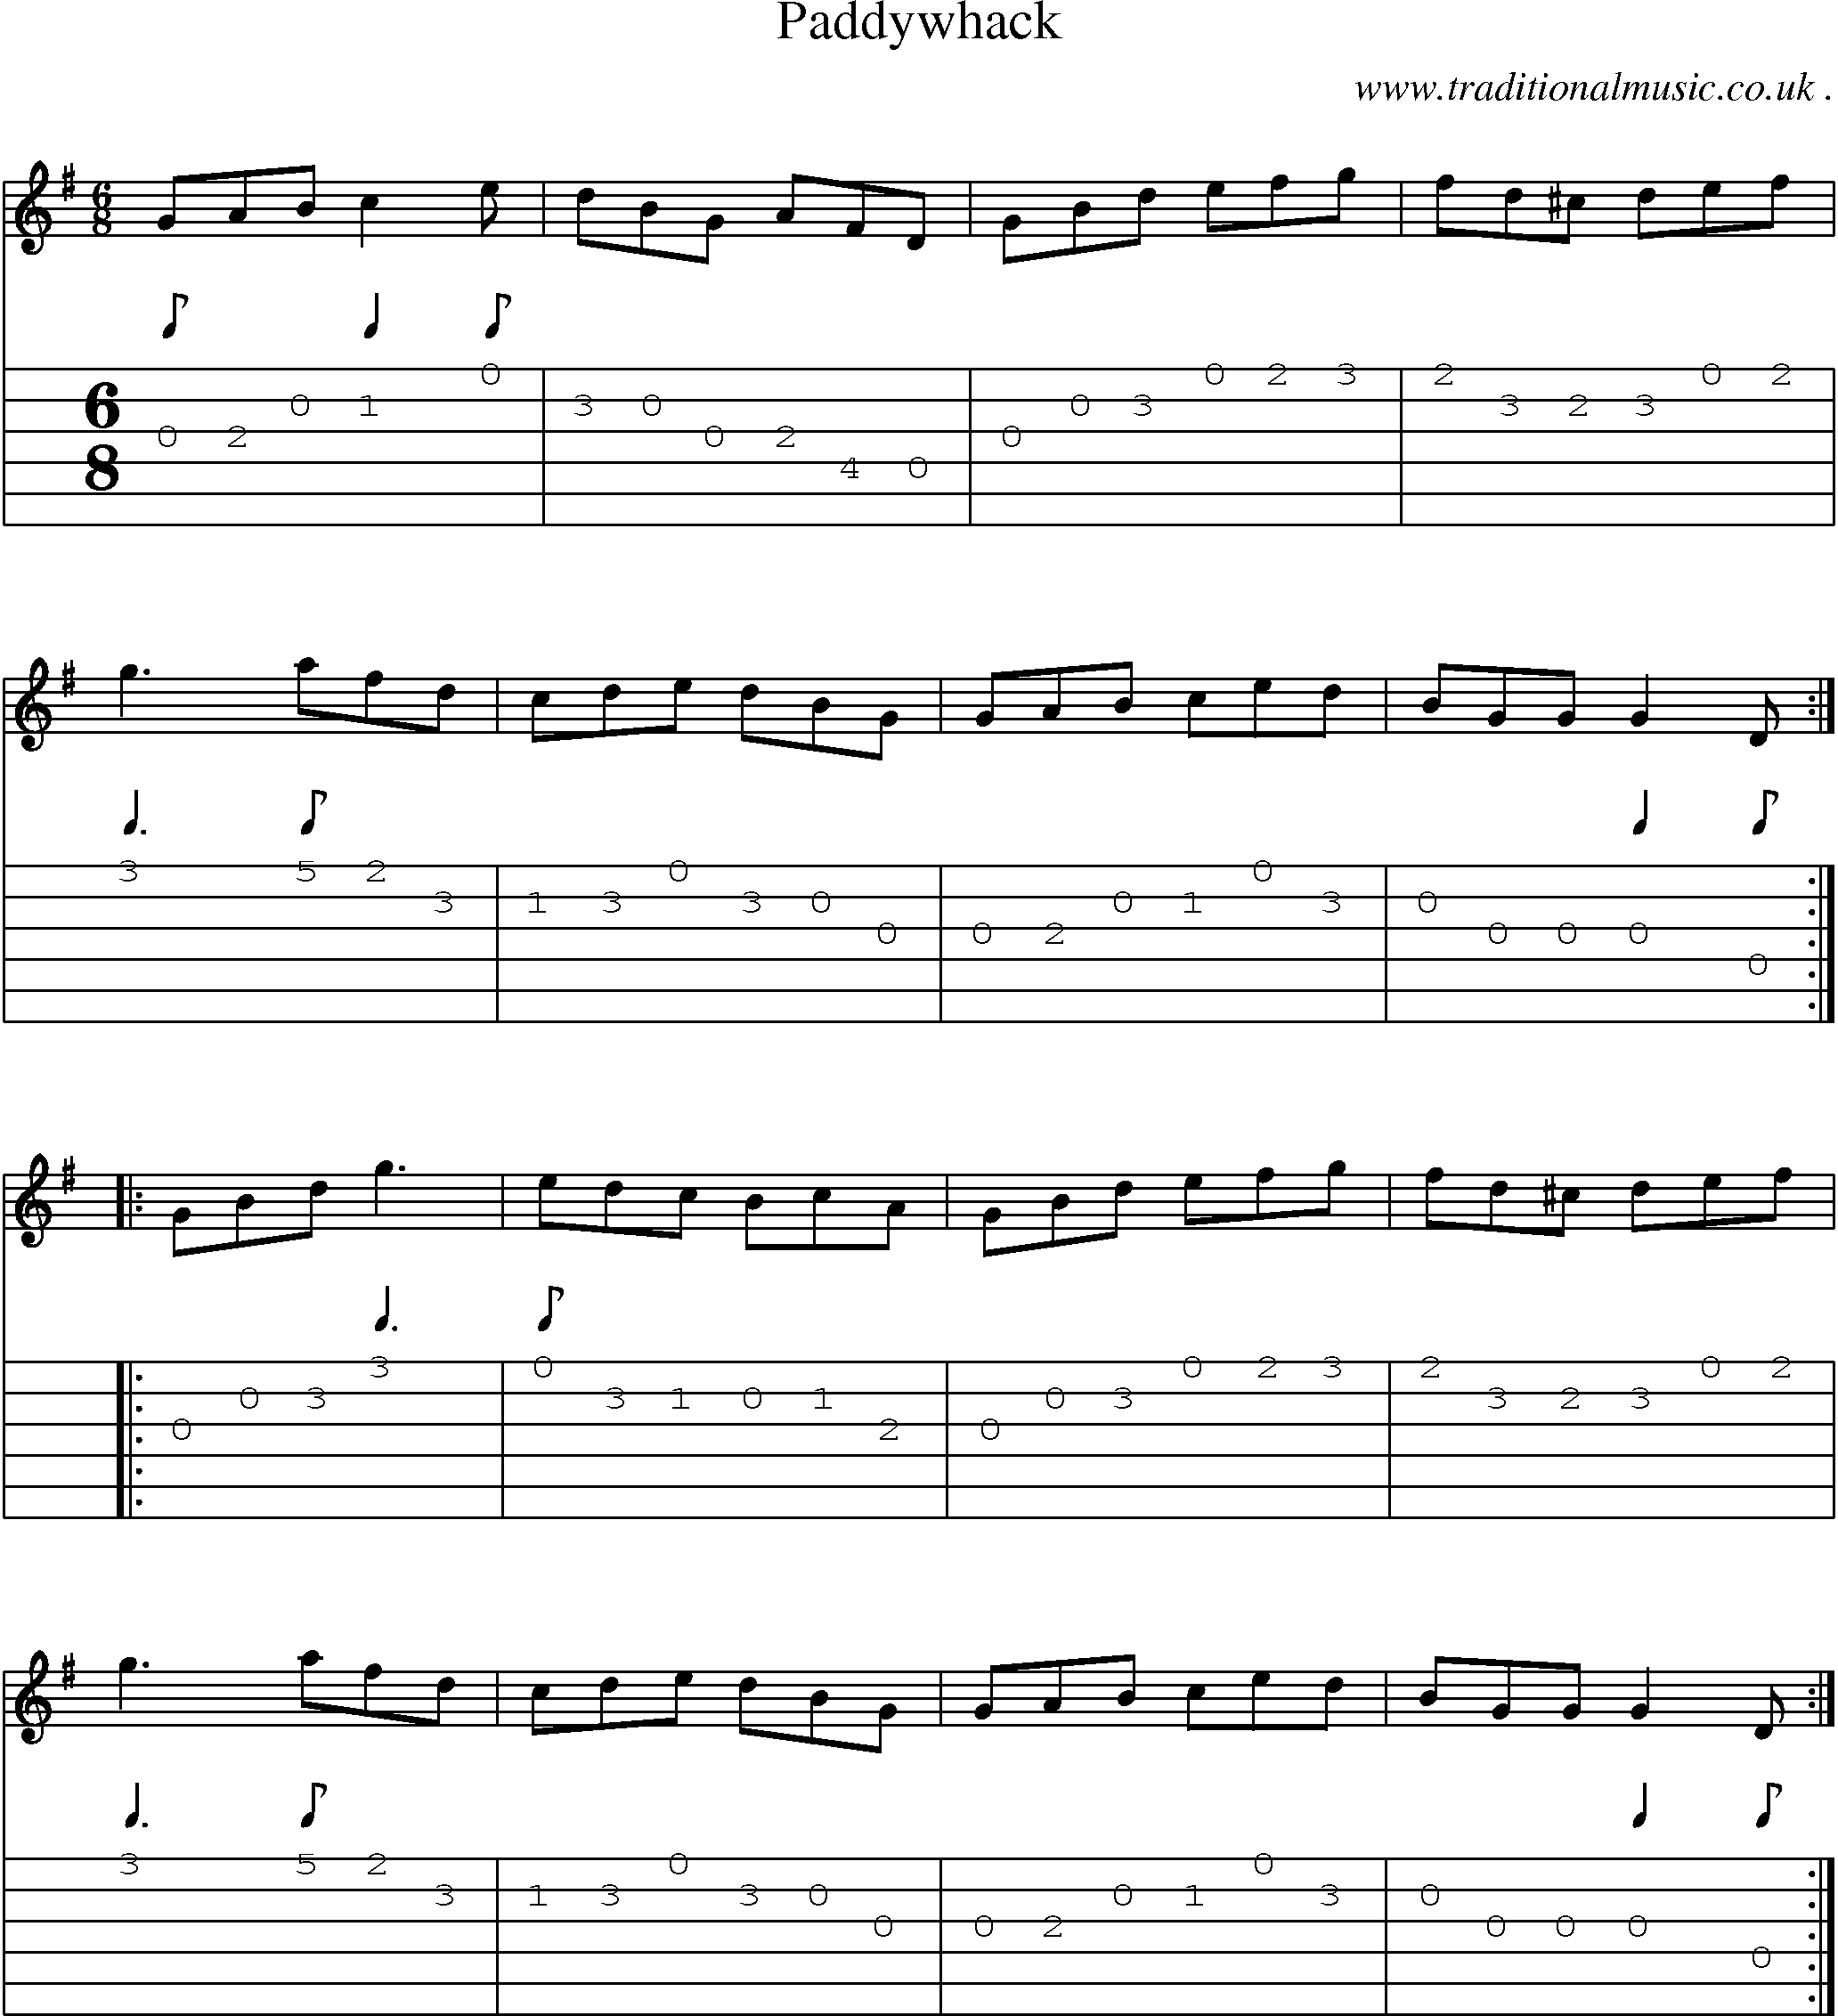 Sheet-Music and Guitar Tabs for Paddywhack